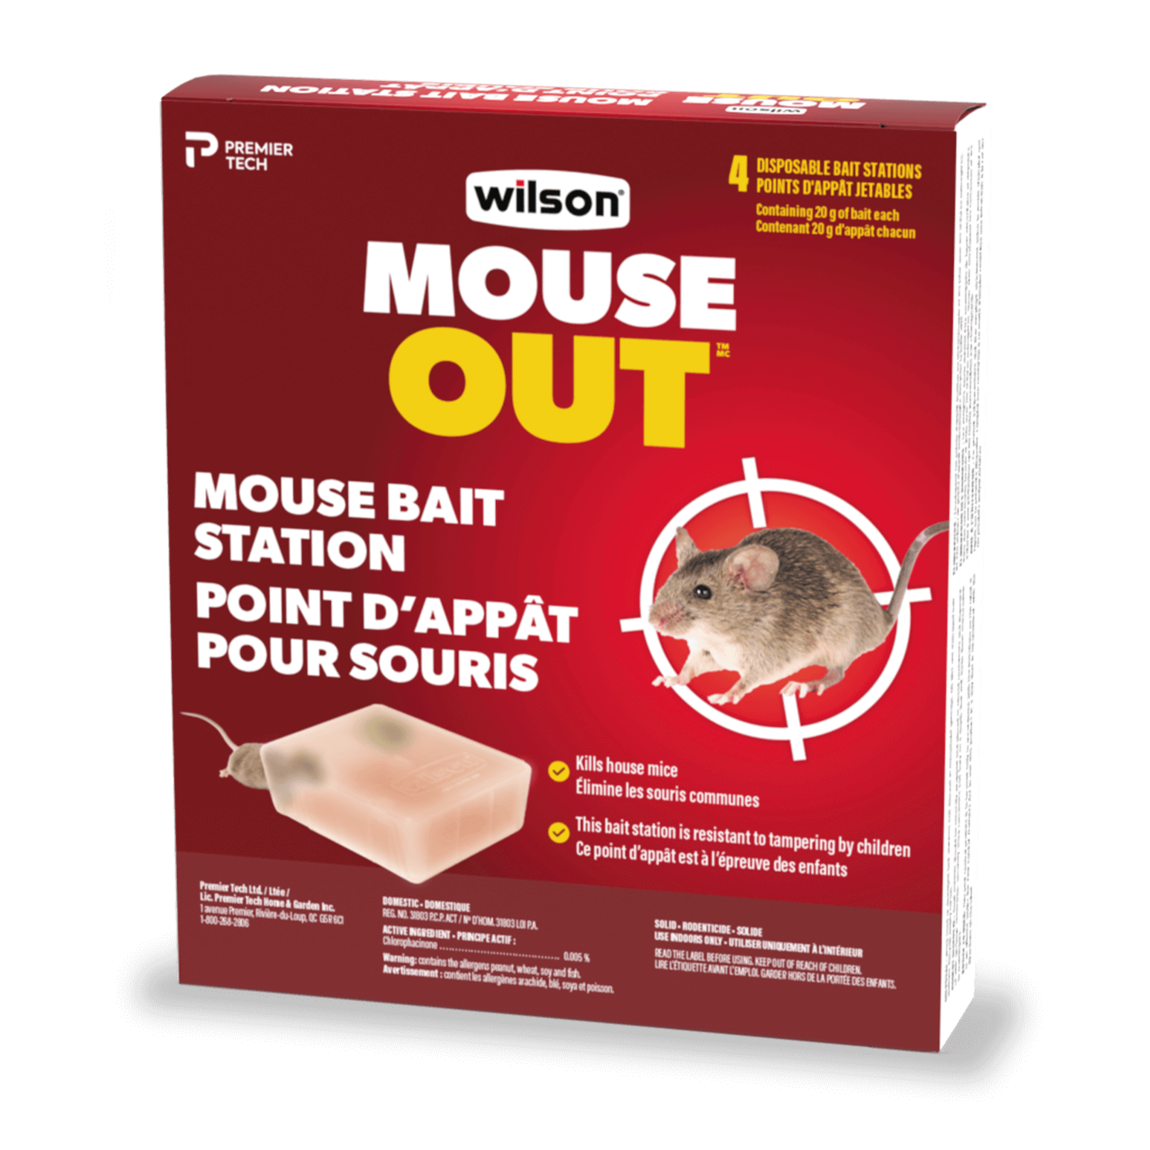 https://www.wilsoncontrol.com/sites/ptgc_wilson/files/styles/swiper_gallery_image/public/2022-01/wilson-mouse-out-mouse-bait-station-4bait.png?itok=wlDWRM_0